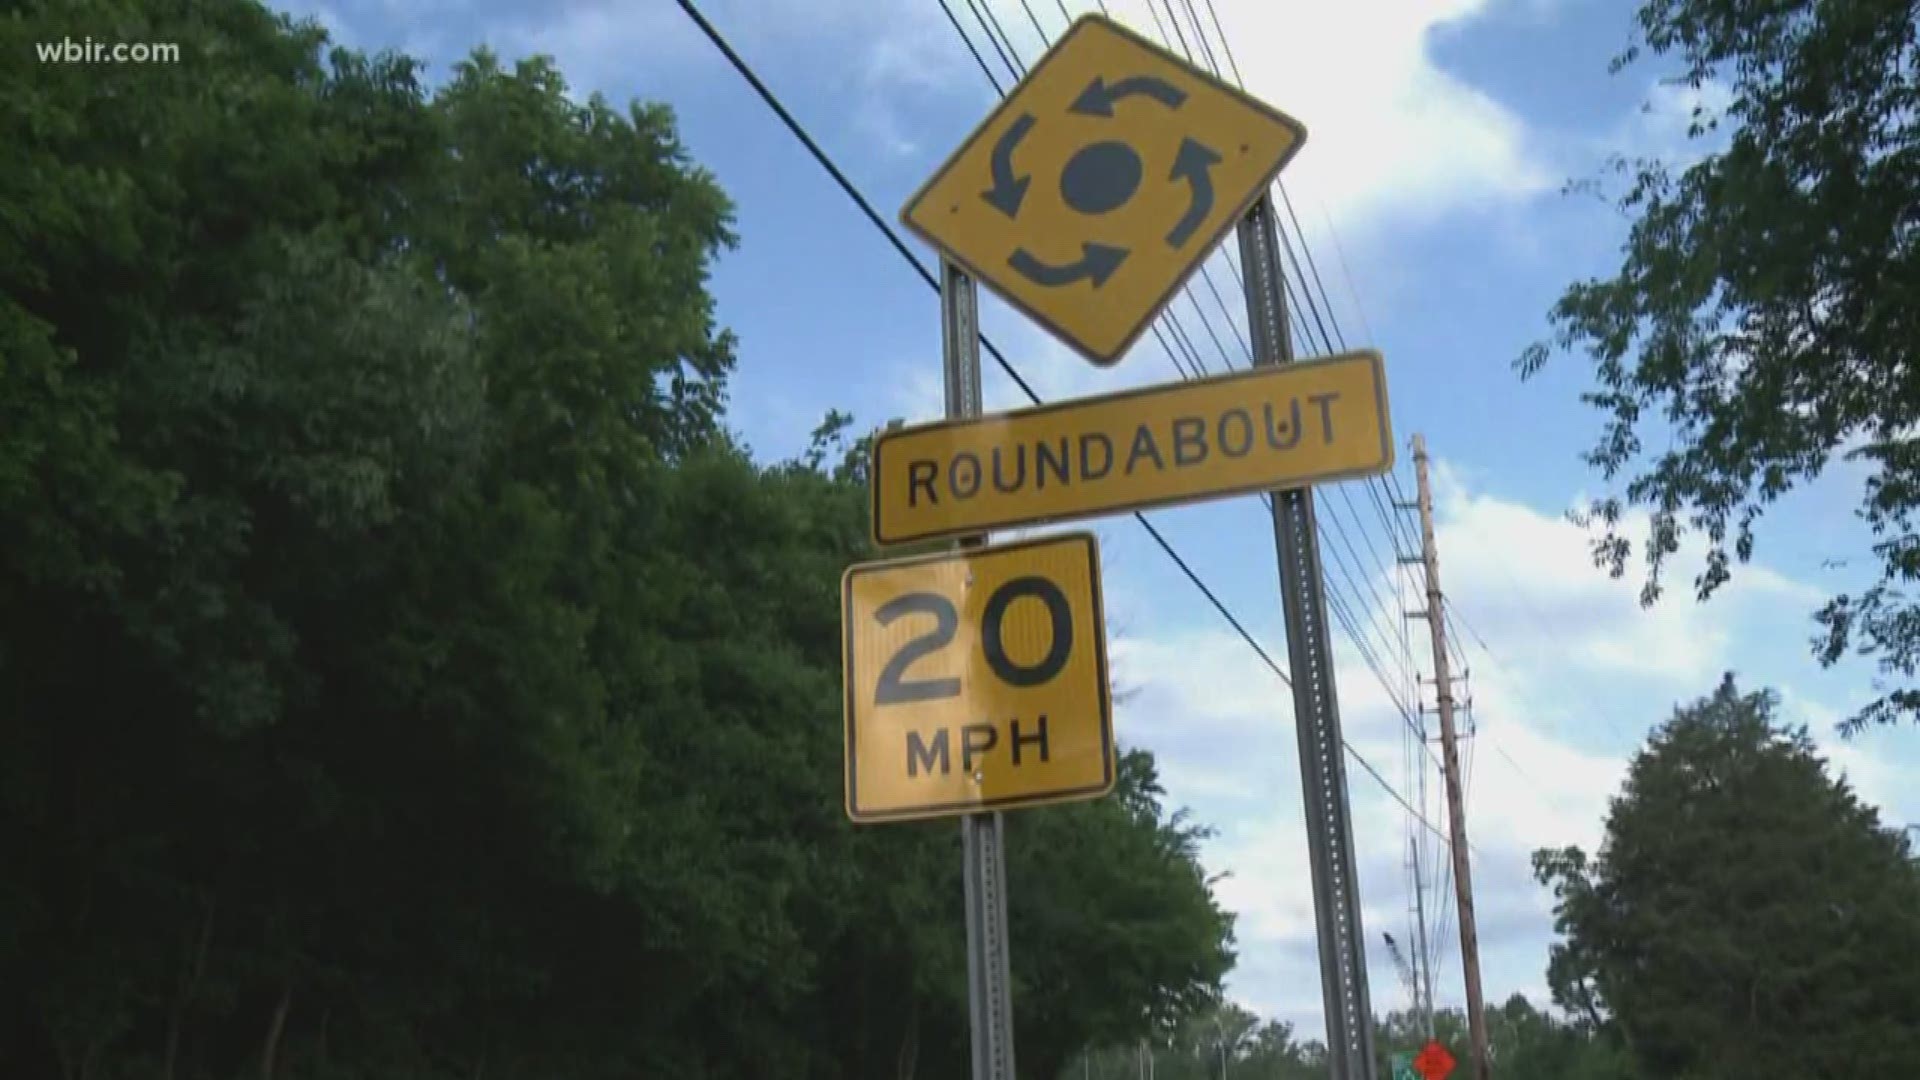 Roundabouts are popping up all over the state. And some drivers say they're confusing. We break it down.